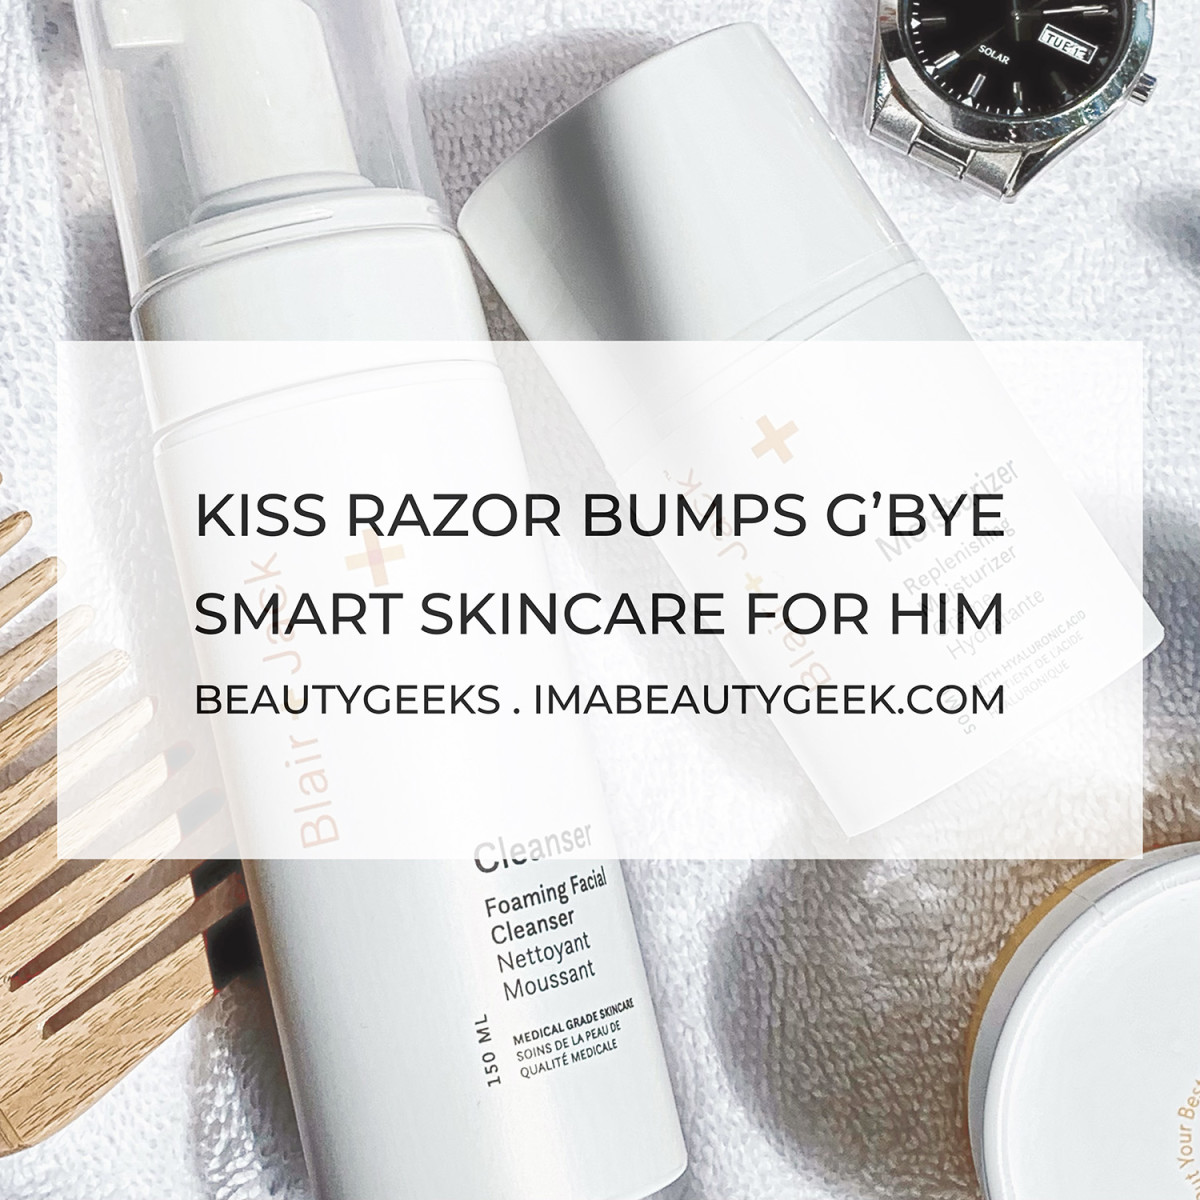 Canadian physician-founded skincare line for men Blair + Jack banishes razor bumps and spotlights his best skin